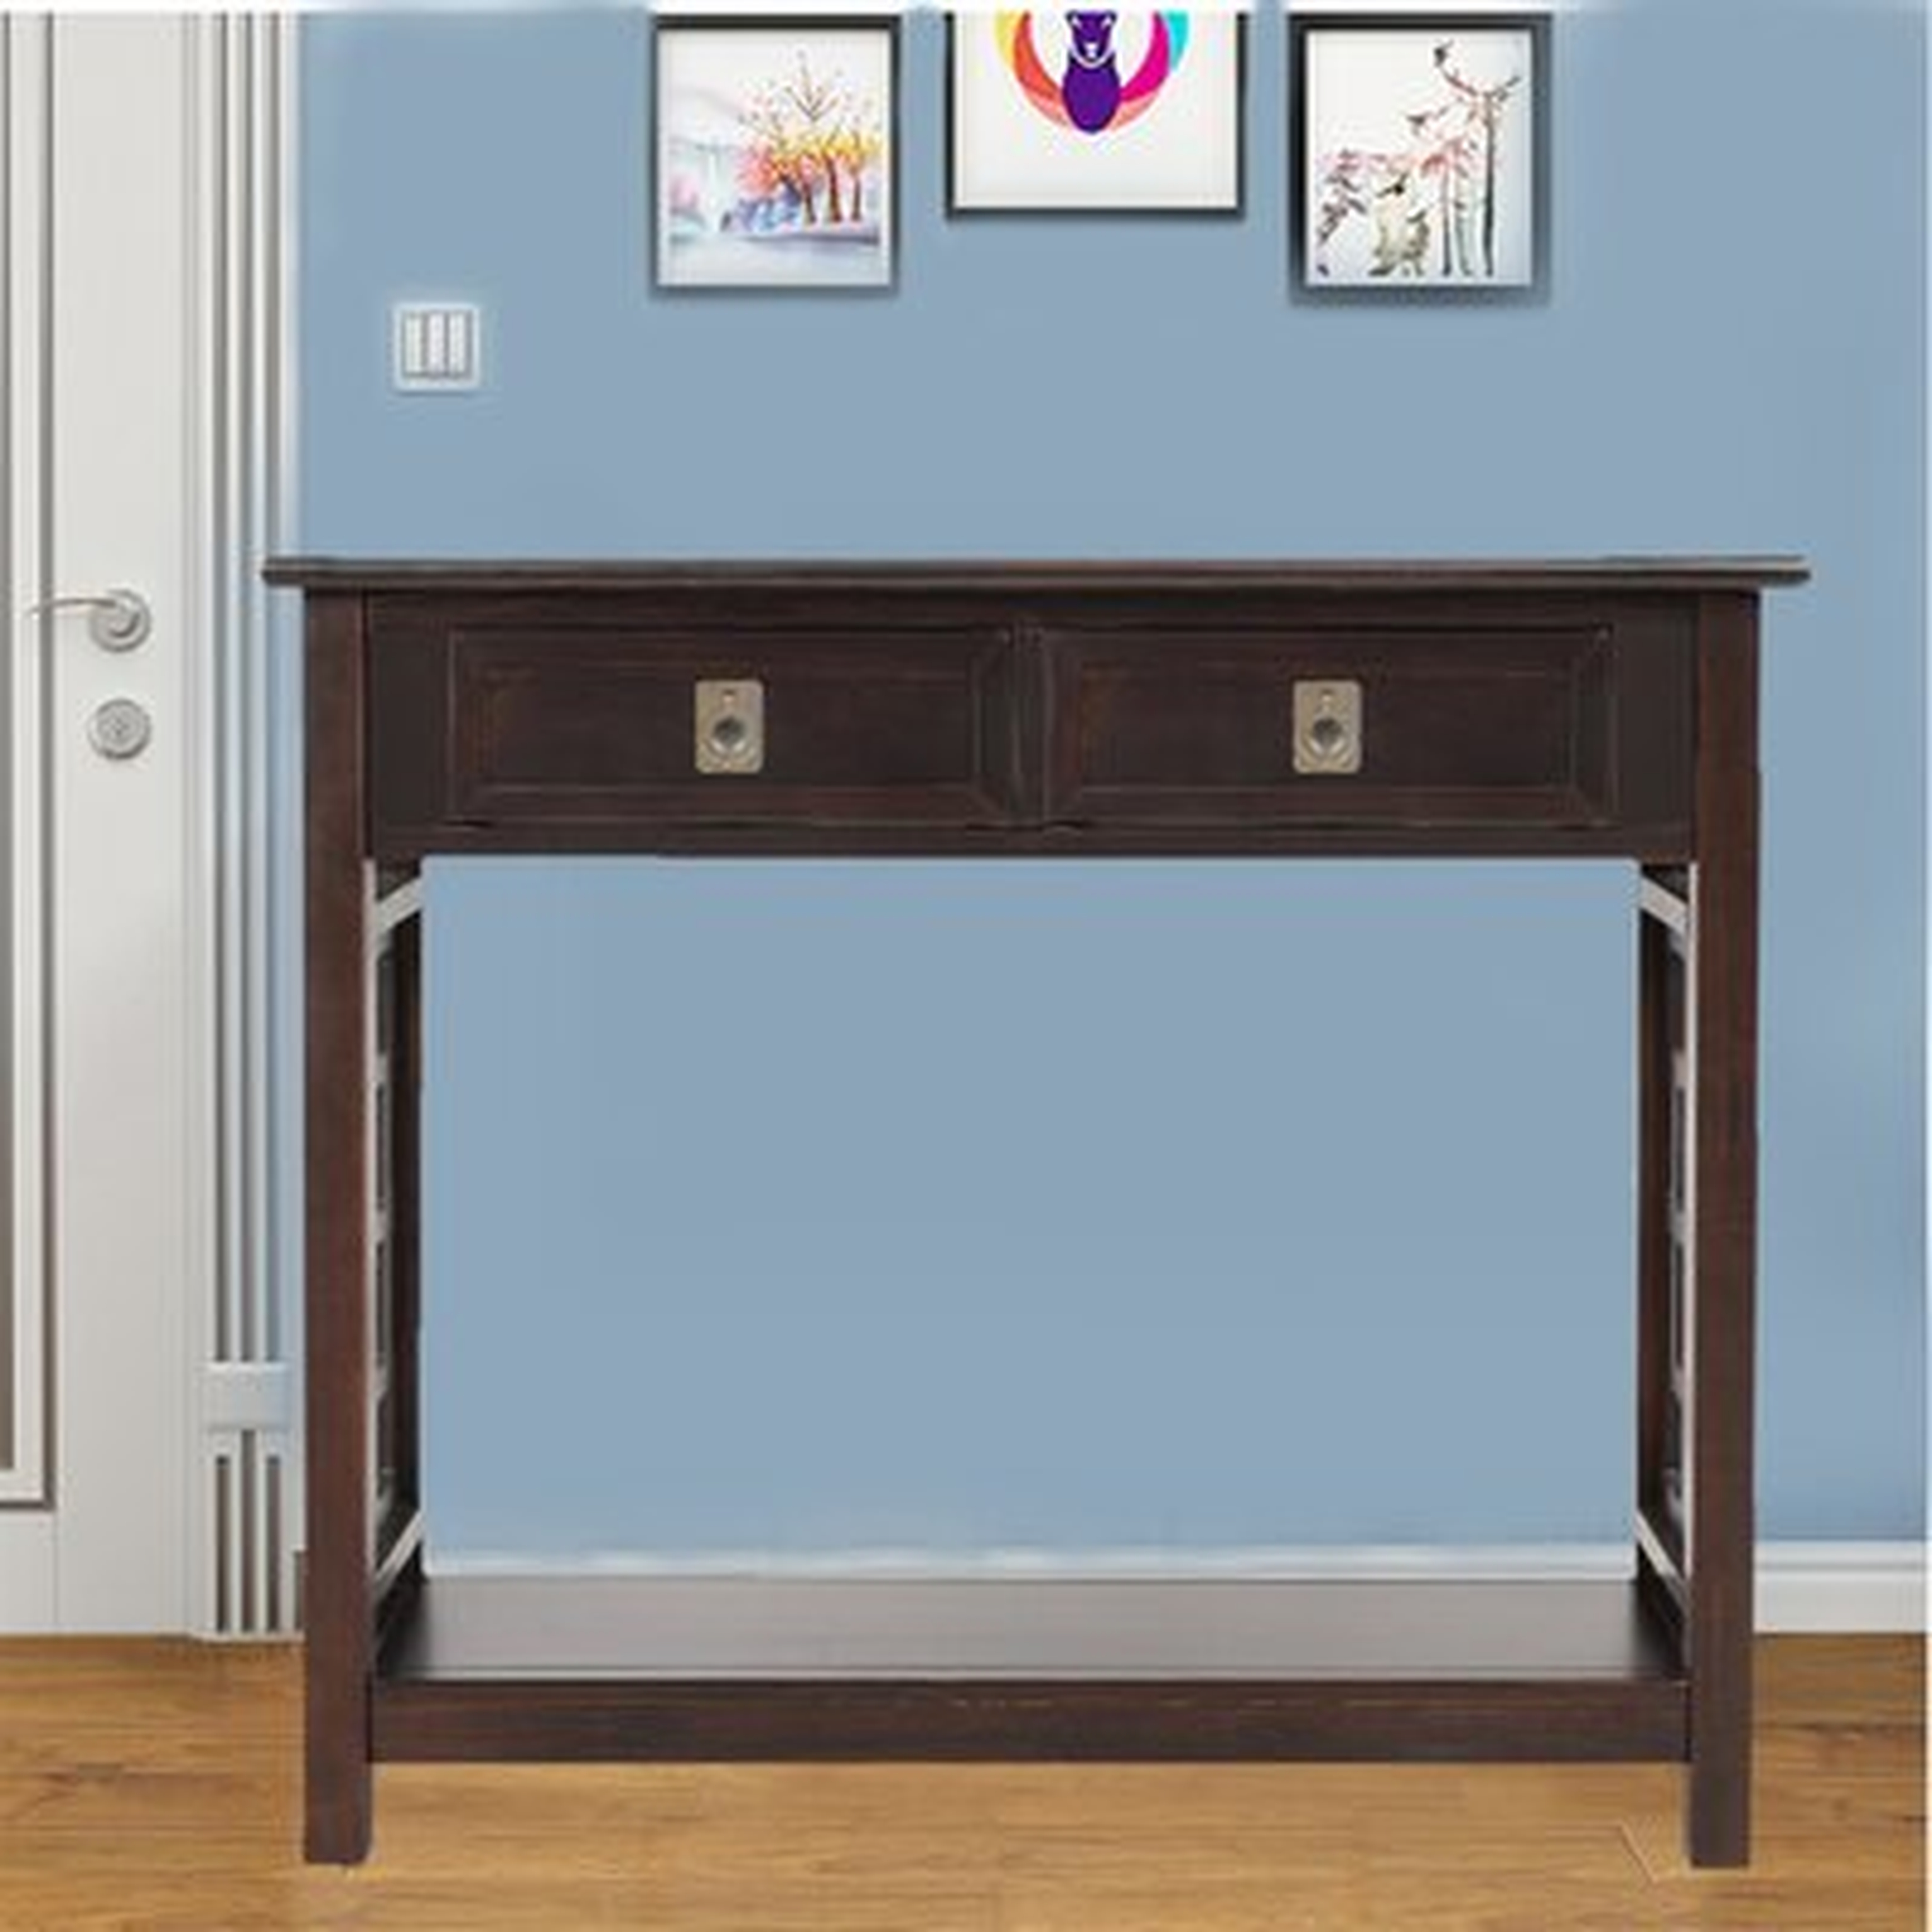 Console Table With 2 Drawers And Bottom Shelf - Wayfair